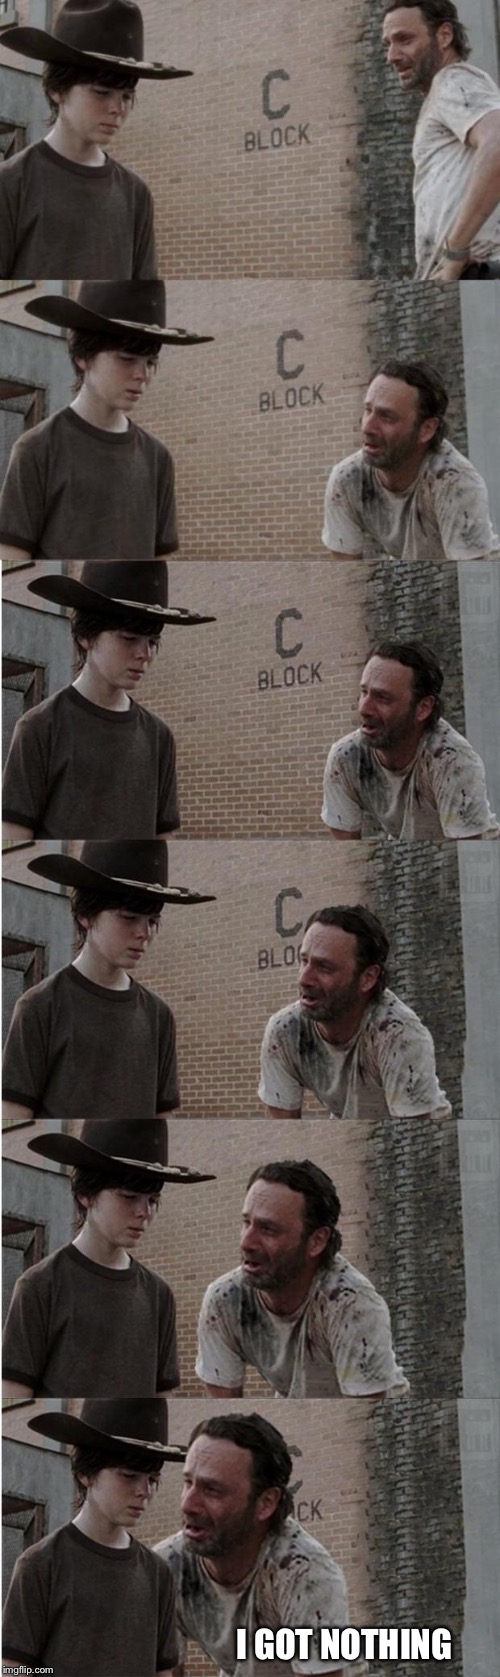 When you are meme blocked  | I GOT NOTHING | image tagged in memes,rick and carl longer | made w/ Imgflip meme maker